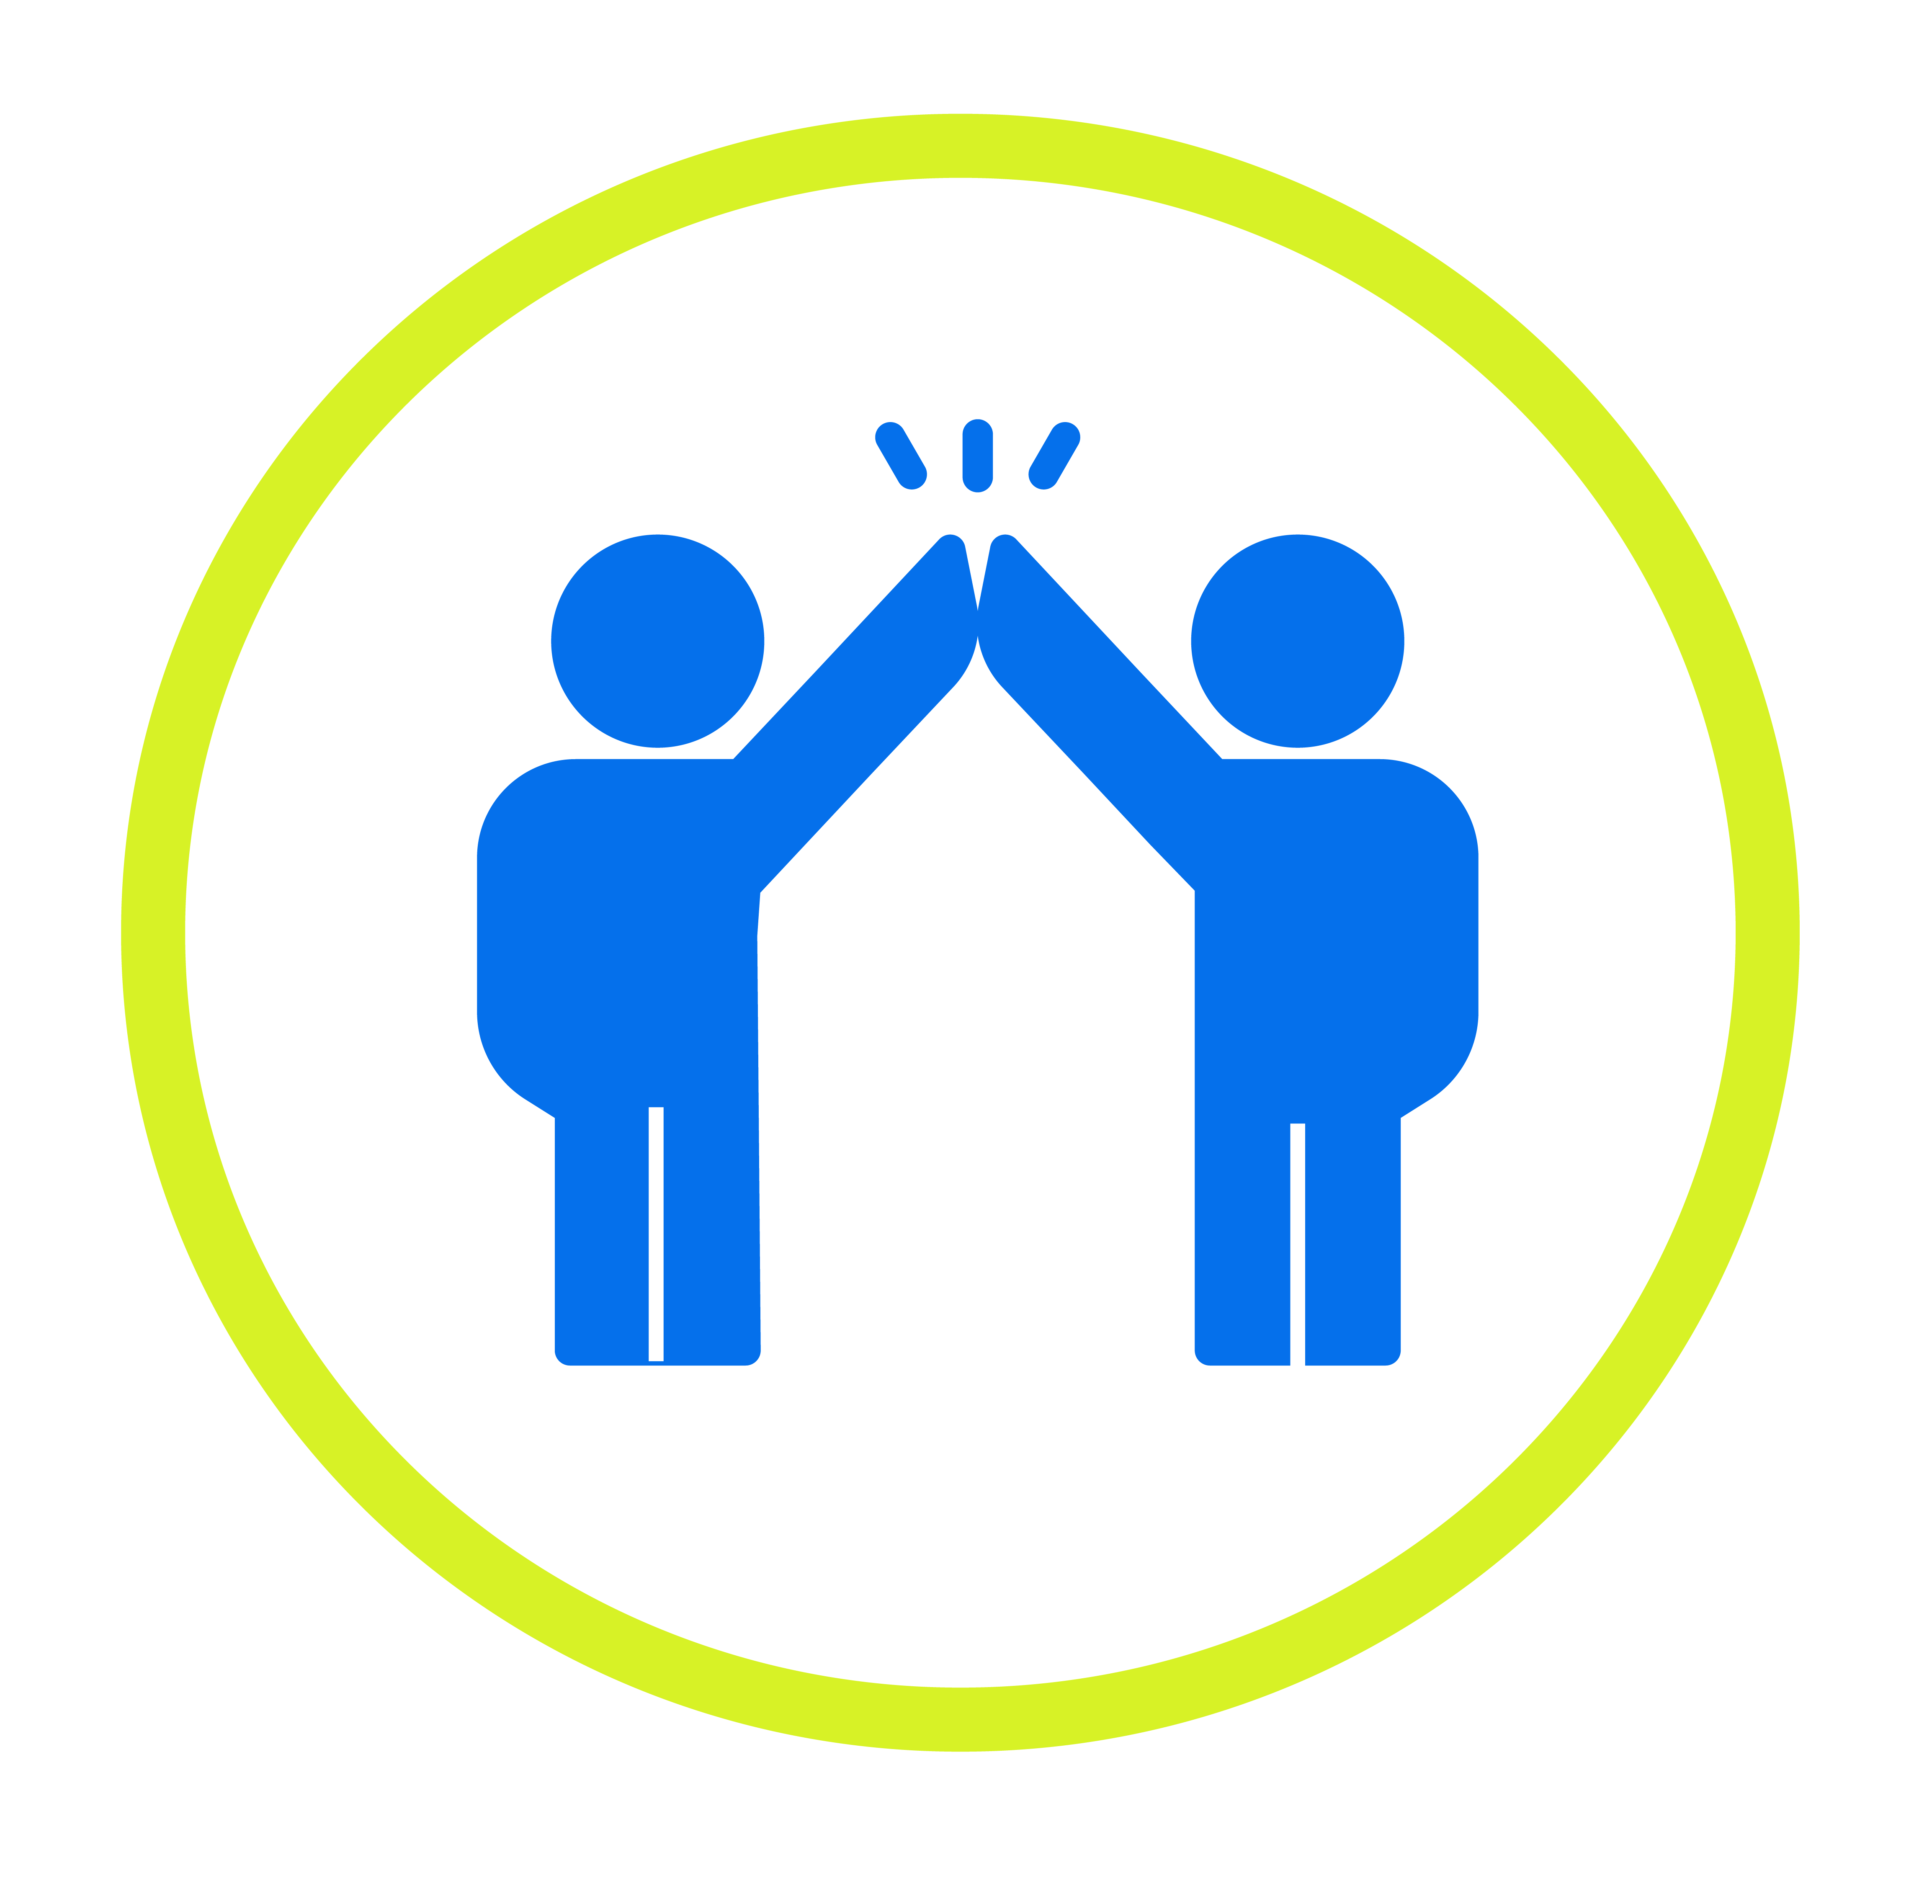 icon of two people figuures doing a high-five